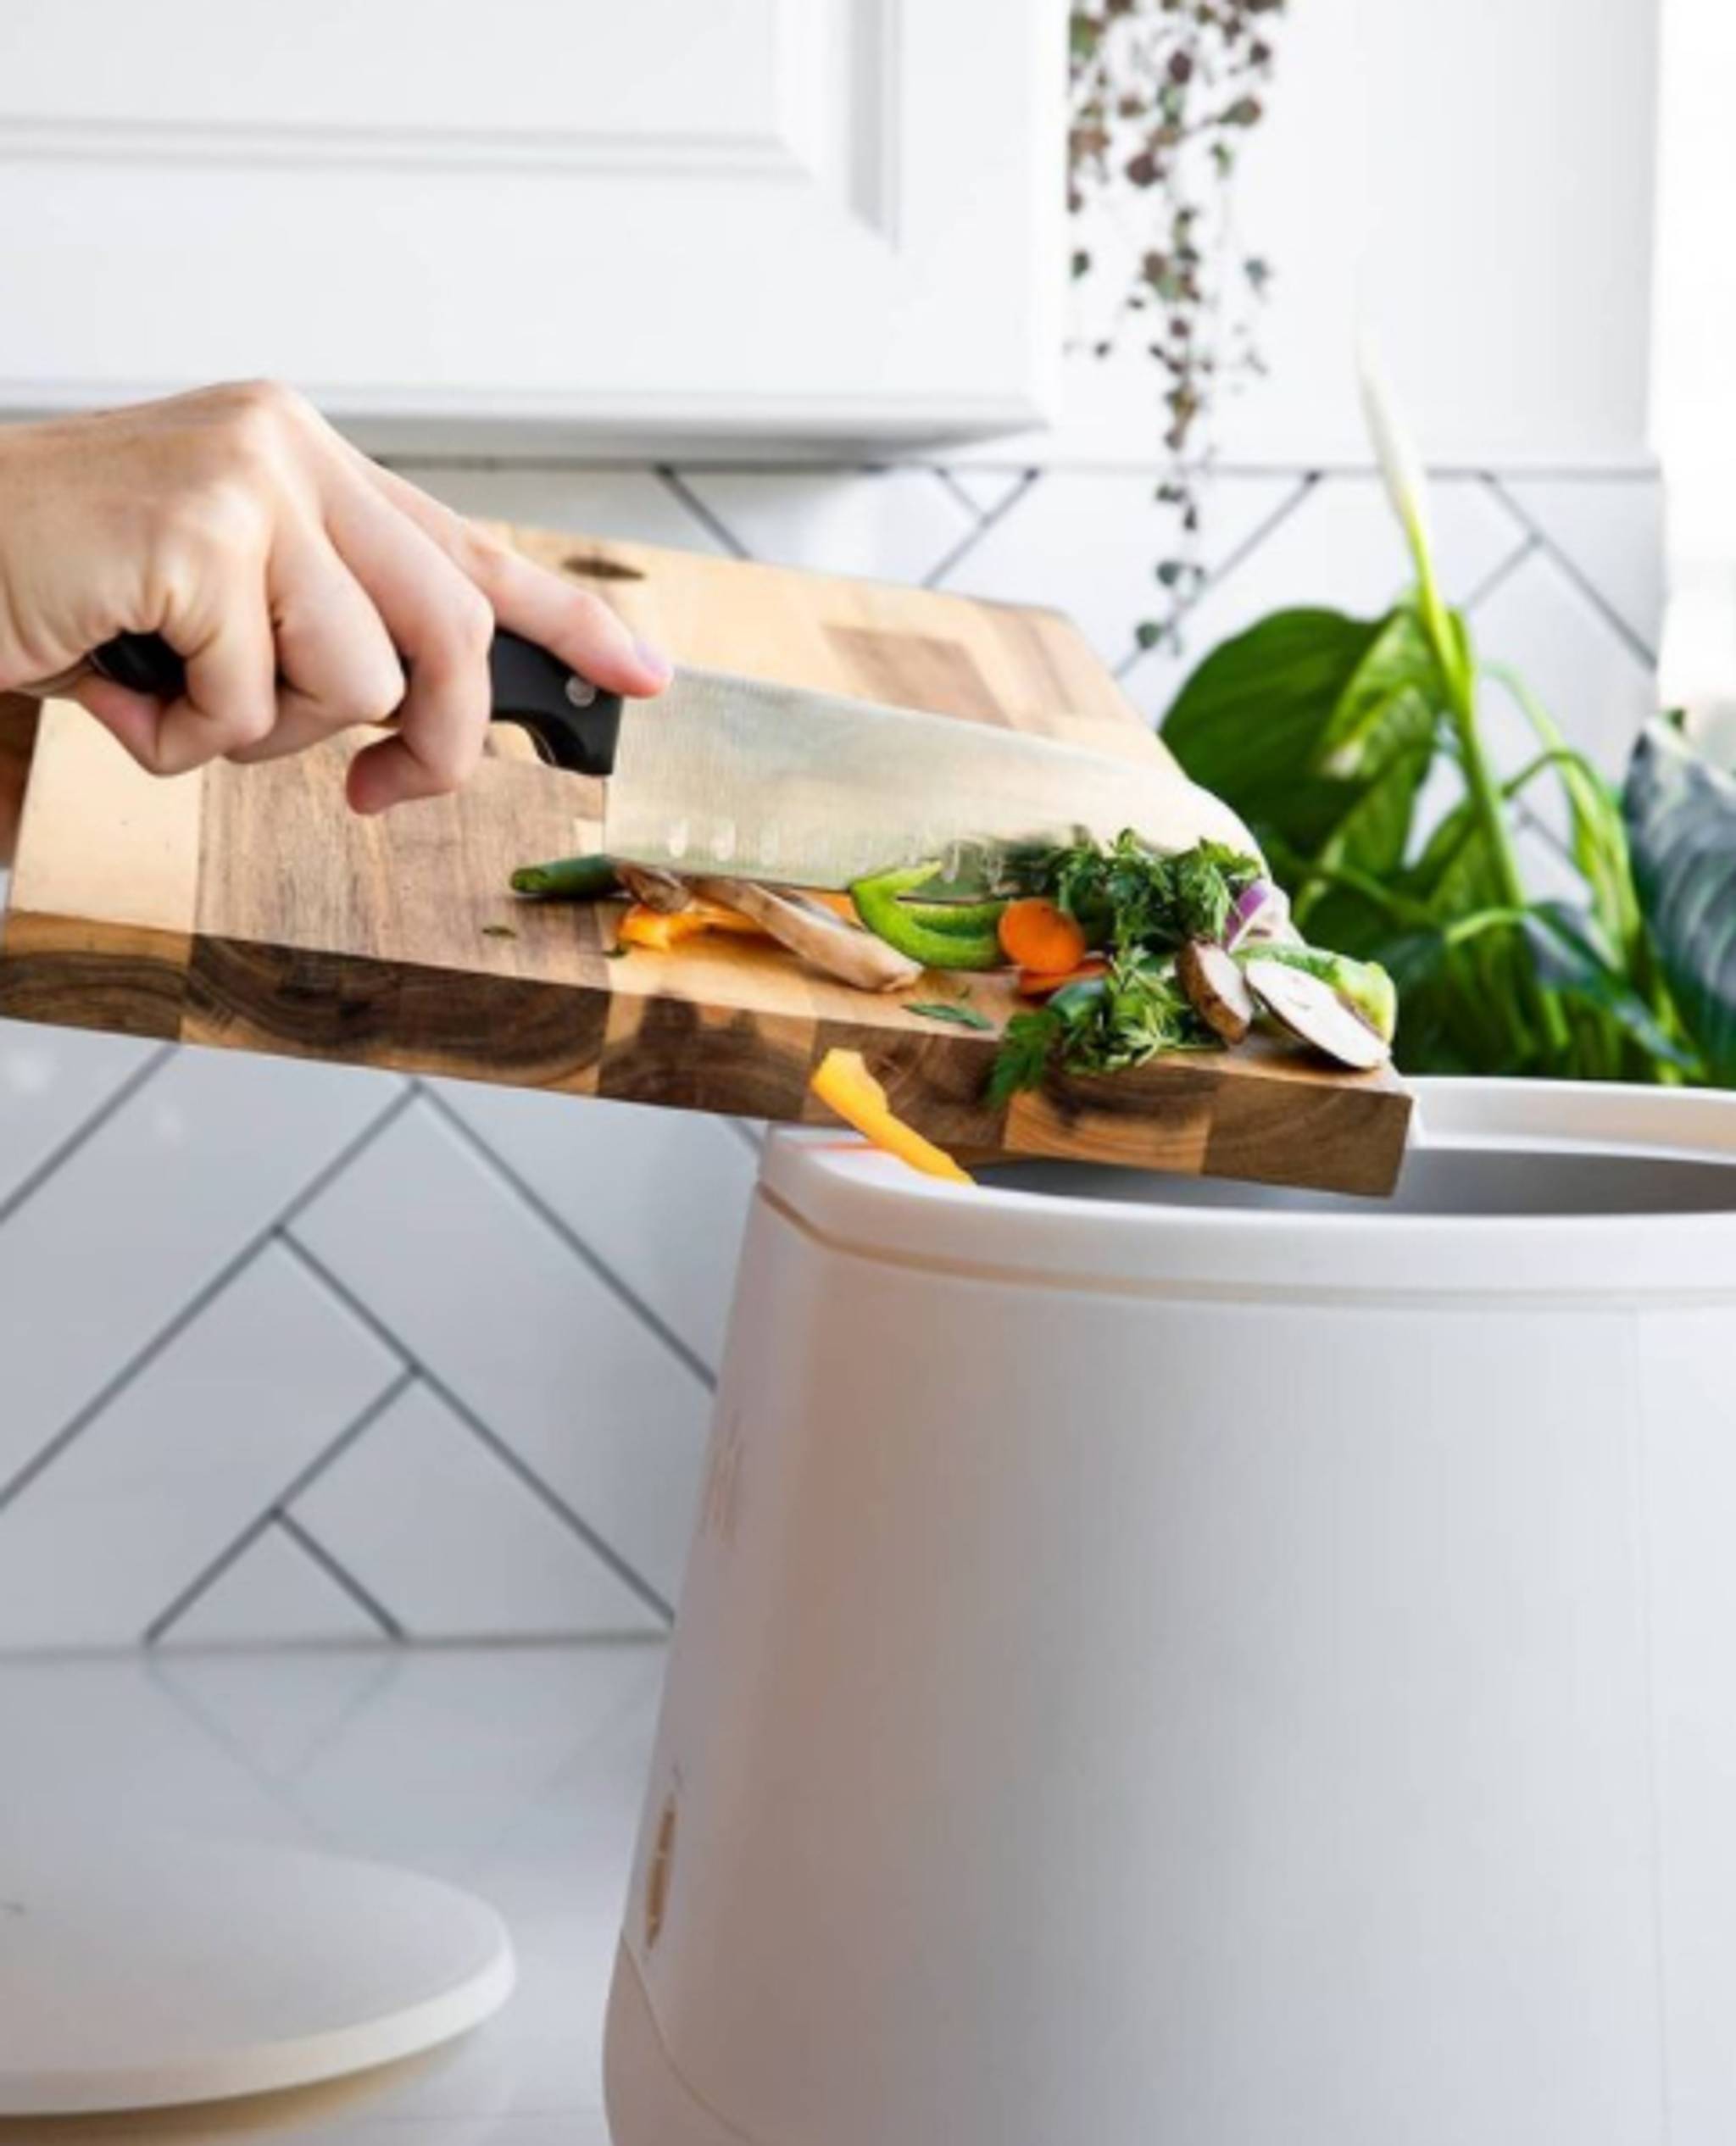 Lomi composting gadget simplifies home recycling